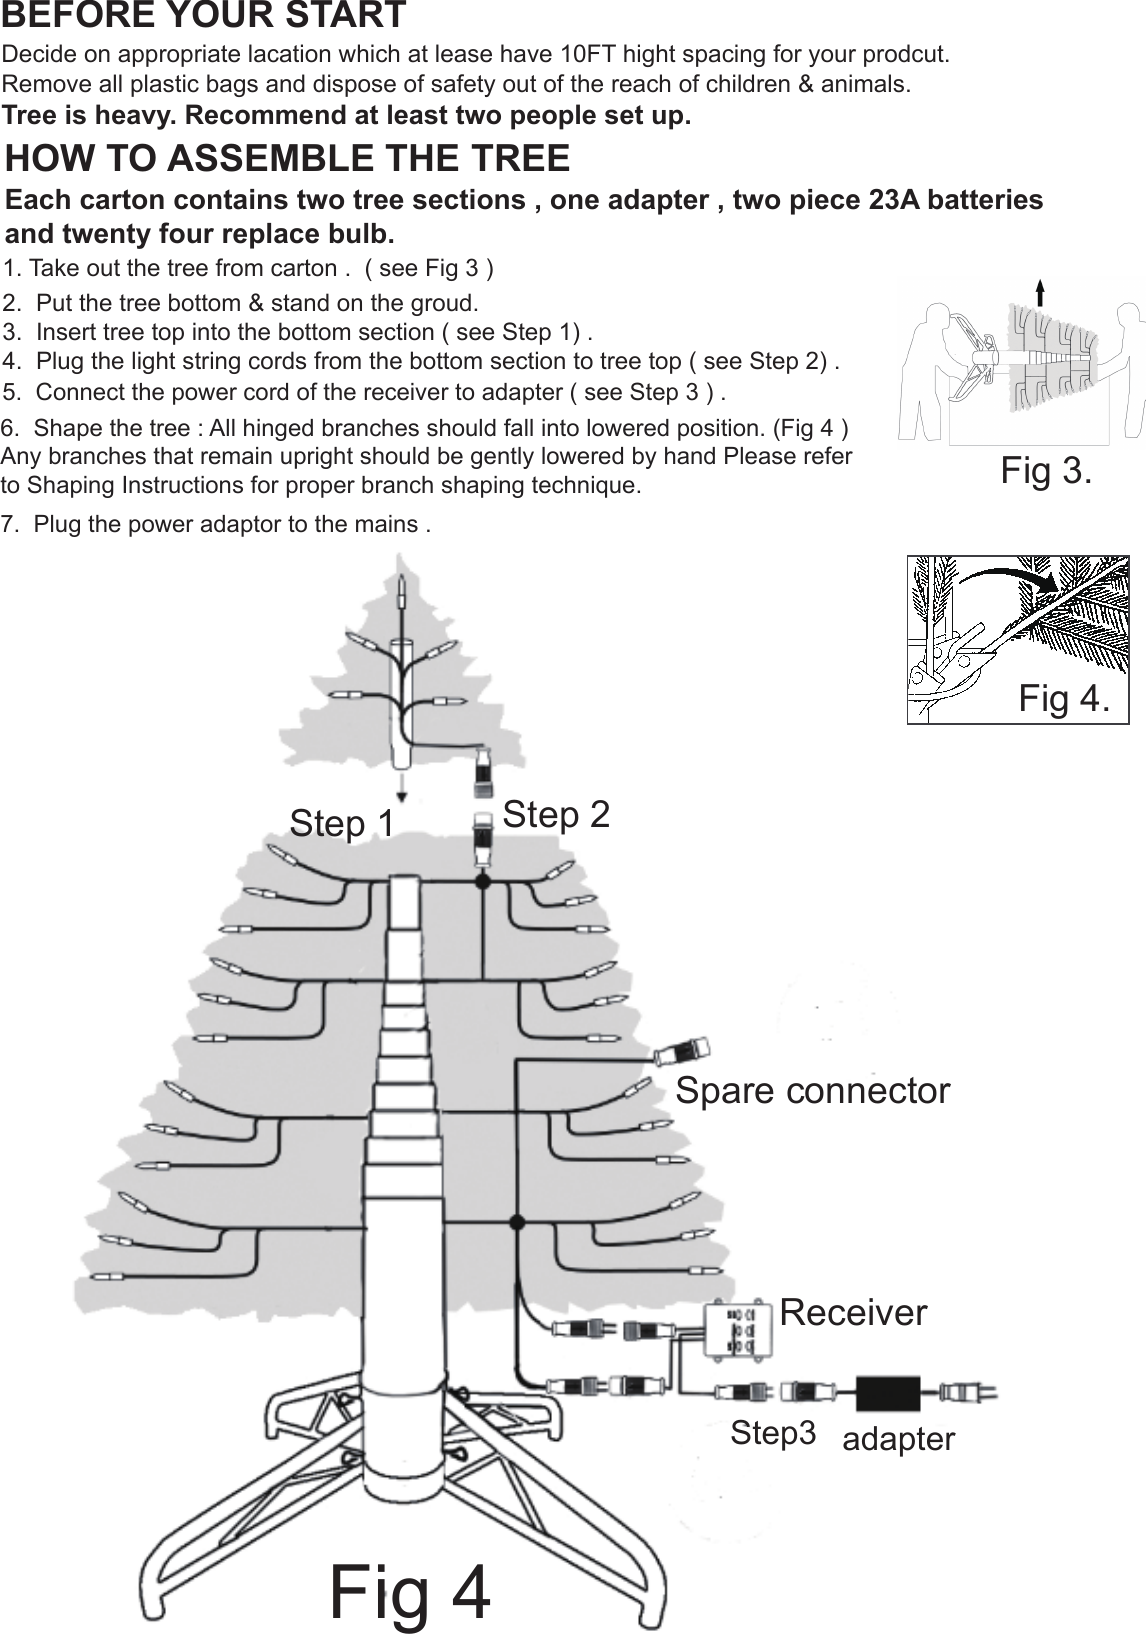 4. Carefully insert new bul into socket and push down bulb lock until it snaps into place ( Fig. 2 ).                                              HOW TO ASSEMBLE THE TREEBEFORE YOUR STARTDecide on appropriate lacation which at lease have 10FT hight spacing for your prodcut.Remove all plastic bags and dispose of safety out of the reach of children &amp; animals.Tree is heavy. Recommend at least two people set up.Each carton contains two tree sections , one adapter , two piece 23A batteries and twenty four replace bulb.1. Take out the tree from carton .  ( see Fig 3 )2.  Put the tree bottom &amp; stand on the groud.3.  Insert tree top into the bottom section ( see Step 1) .4.  Plug the light string cords from the bottom section to tree top ( see Step 2) .Step 1 Step 2Step3 adapterSpare connector5.  Connect the power cord of the receiver to adapter ( see Step 3 ) .Receiver6.  Shape the tree : All hinged branches should fall into lowered position. (Fig 4 )  Any branches that remain upright should be gently lowered by hand Please refer to Shaping Instructions for proper branch shaping technique. Fig 4Fig 3.7.  Plug the power adaptor to the mains .Fig 4.